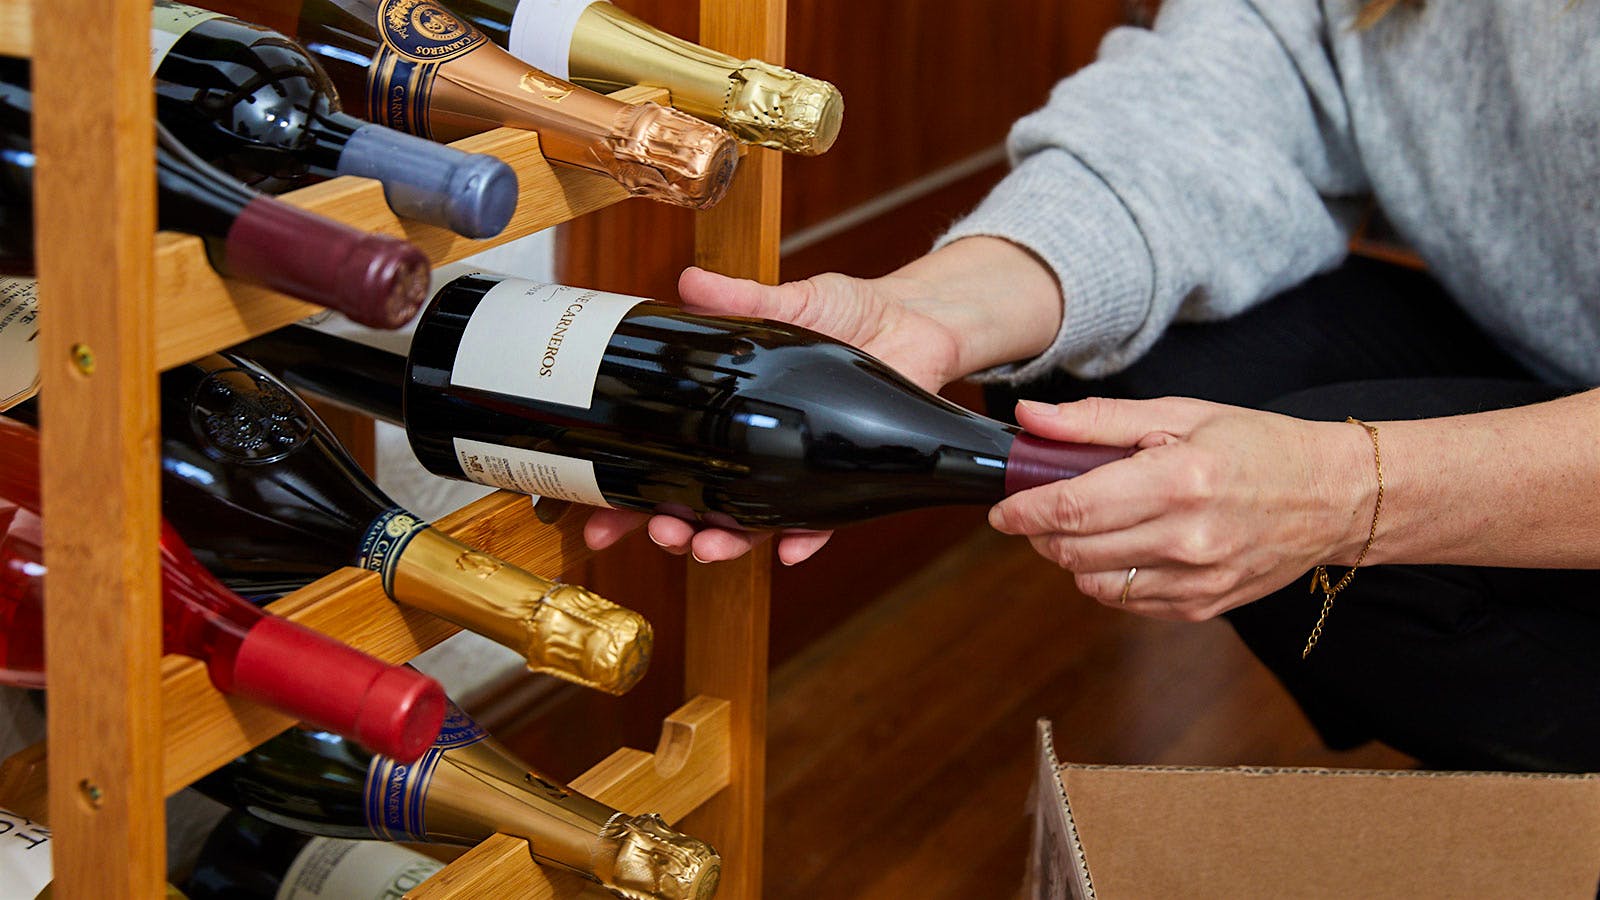 Readers from across the country share their experiences and preferences for buying wine.